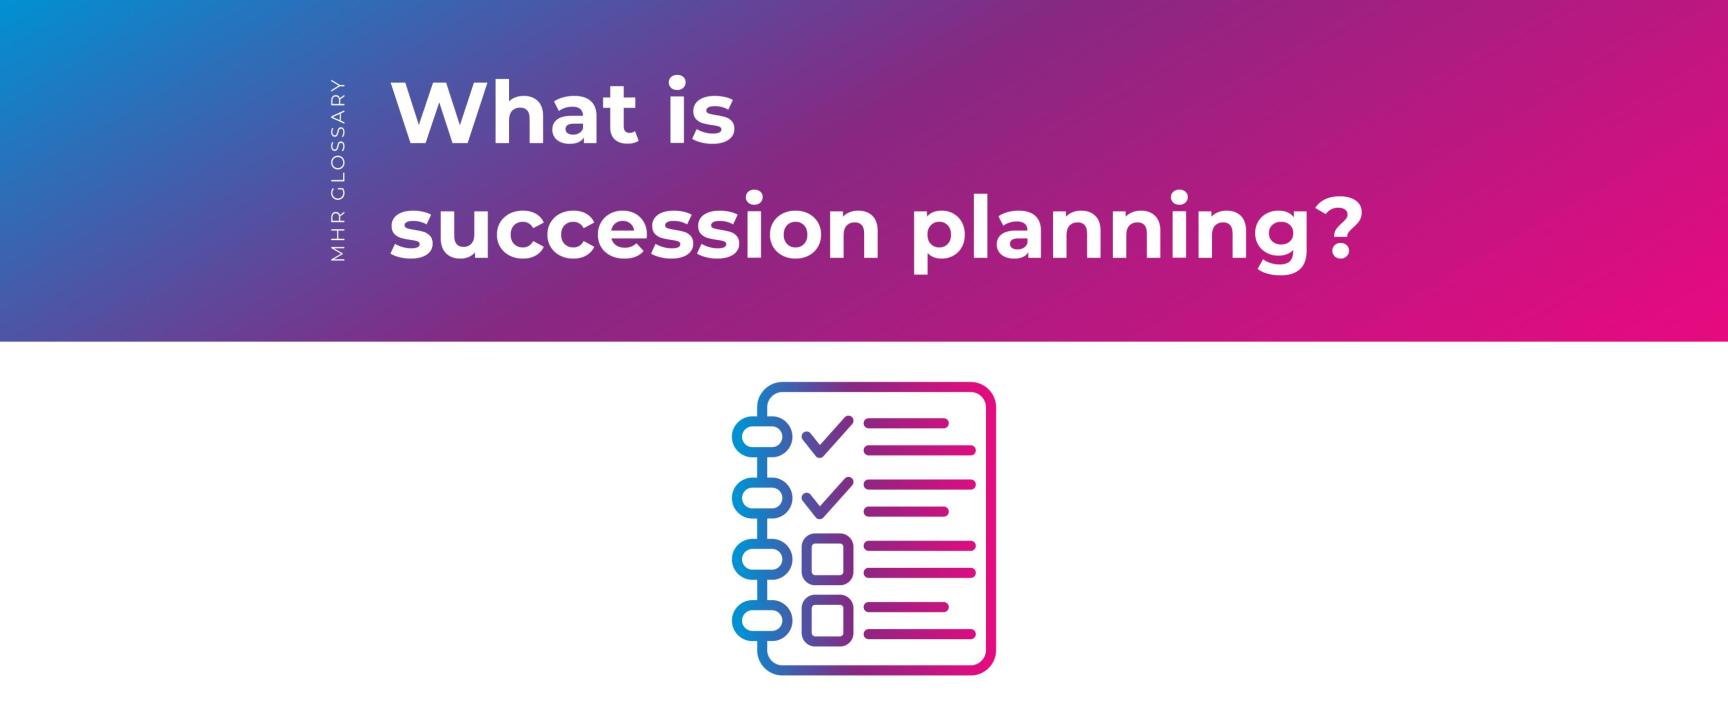 what is succession planning? with a checklist icon.